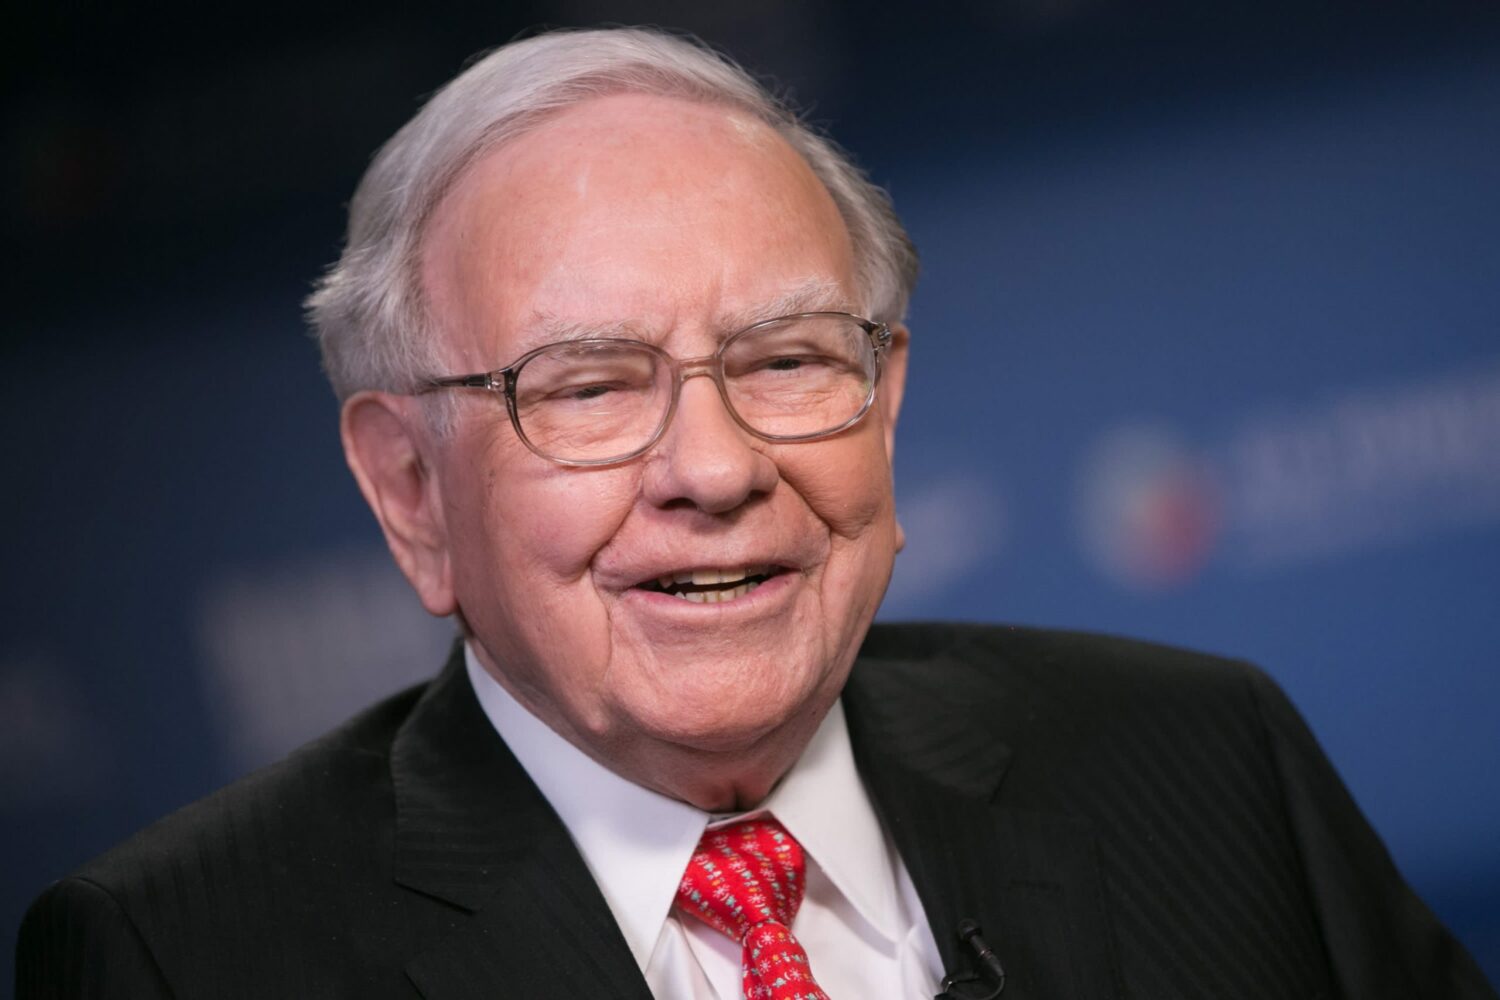 You’ve likely seen Warren Buffett, one of the wealthiest people alive, discussing finances and other topics. How did he amass such wealth?